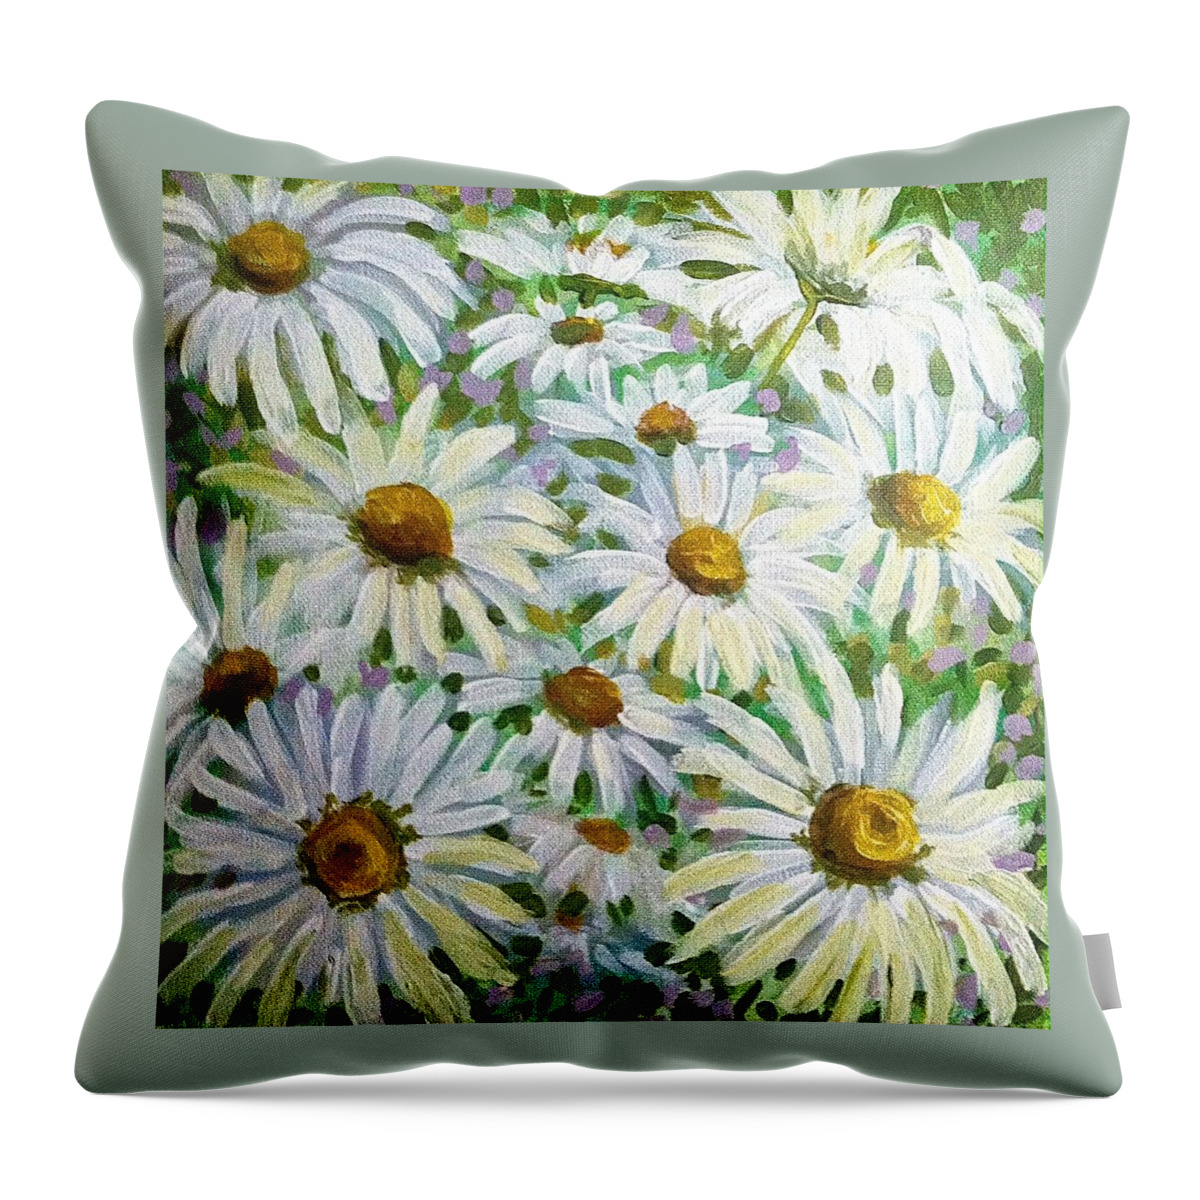 Daisy Throw Pillow featuring the painting Daisies by Jeanette Jarmon